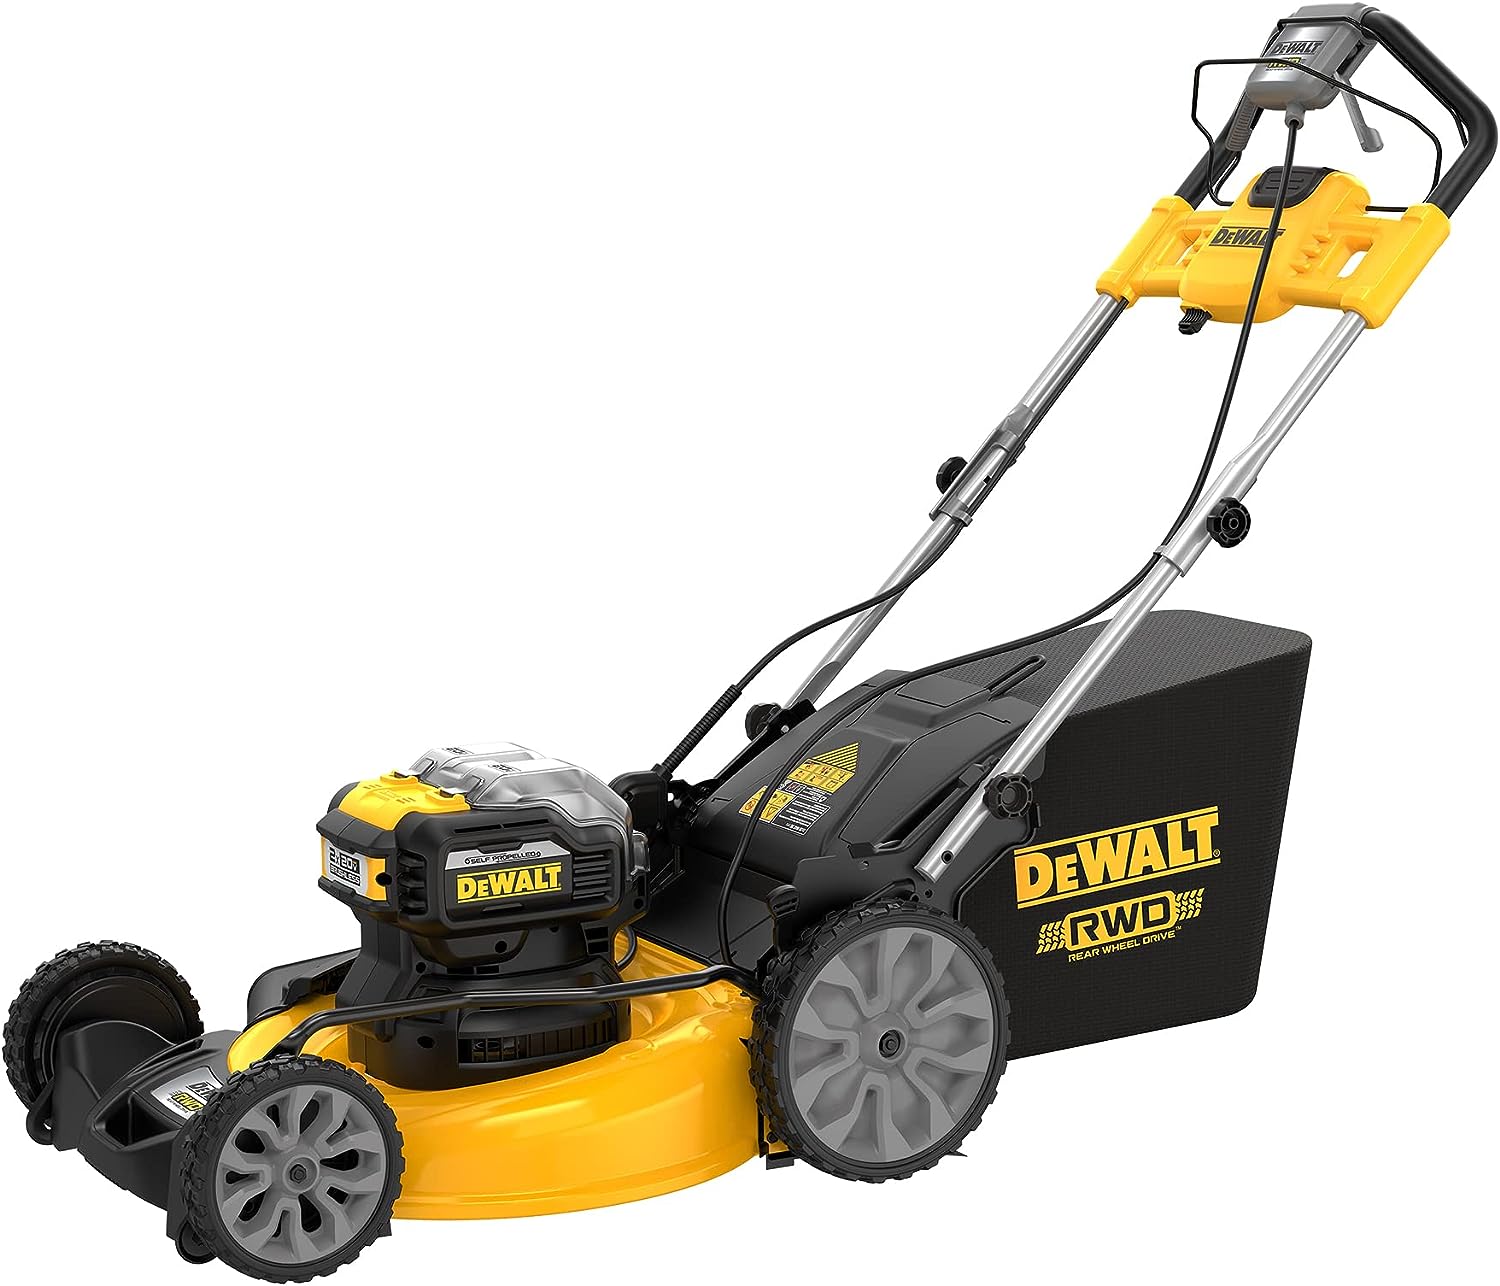 DEWALT 20V MAX Lawn Mower, Cordless, Self-Propelled with Batteries/Charger - $420